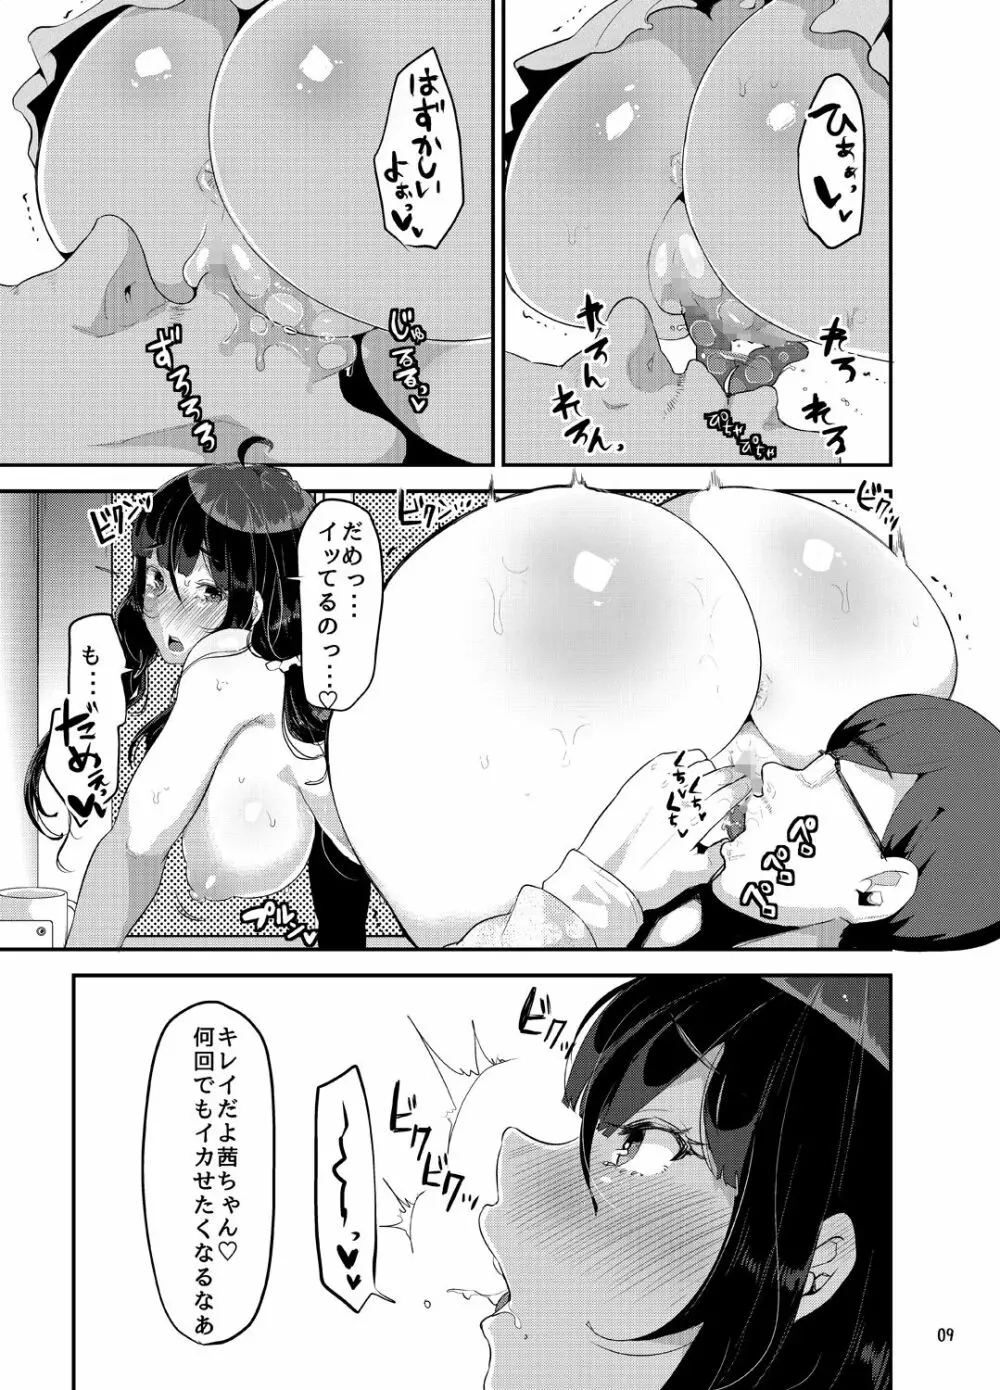 好き好き好き好き好き好き好き好き ver.4 Page.10